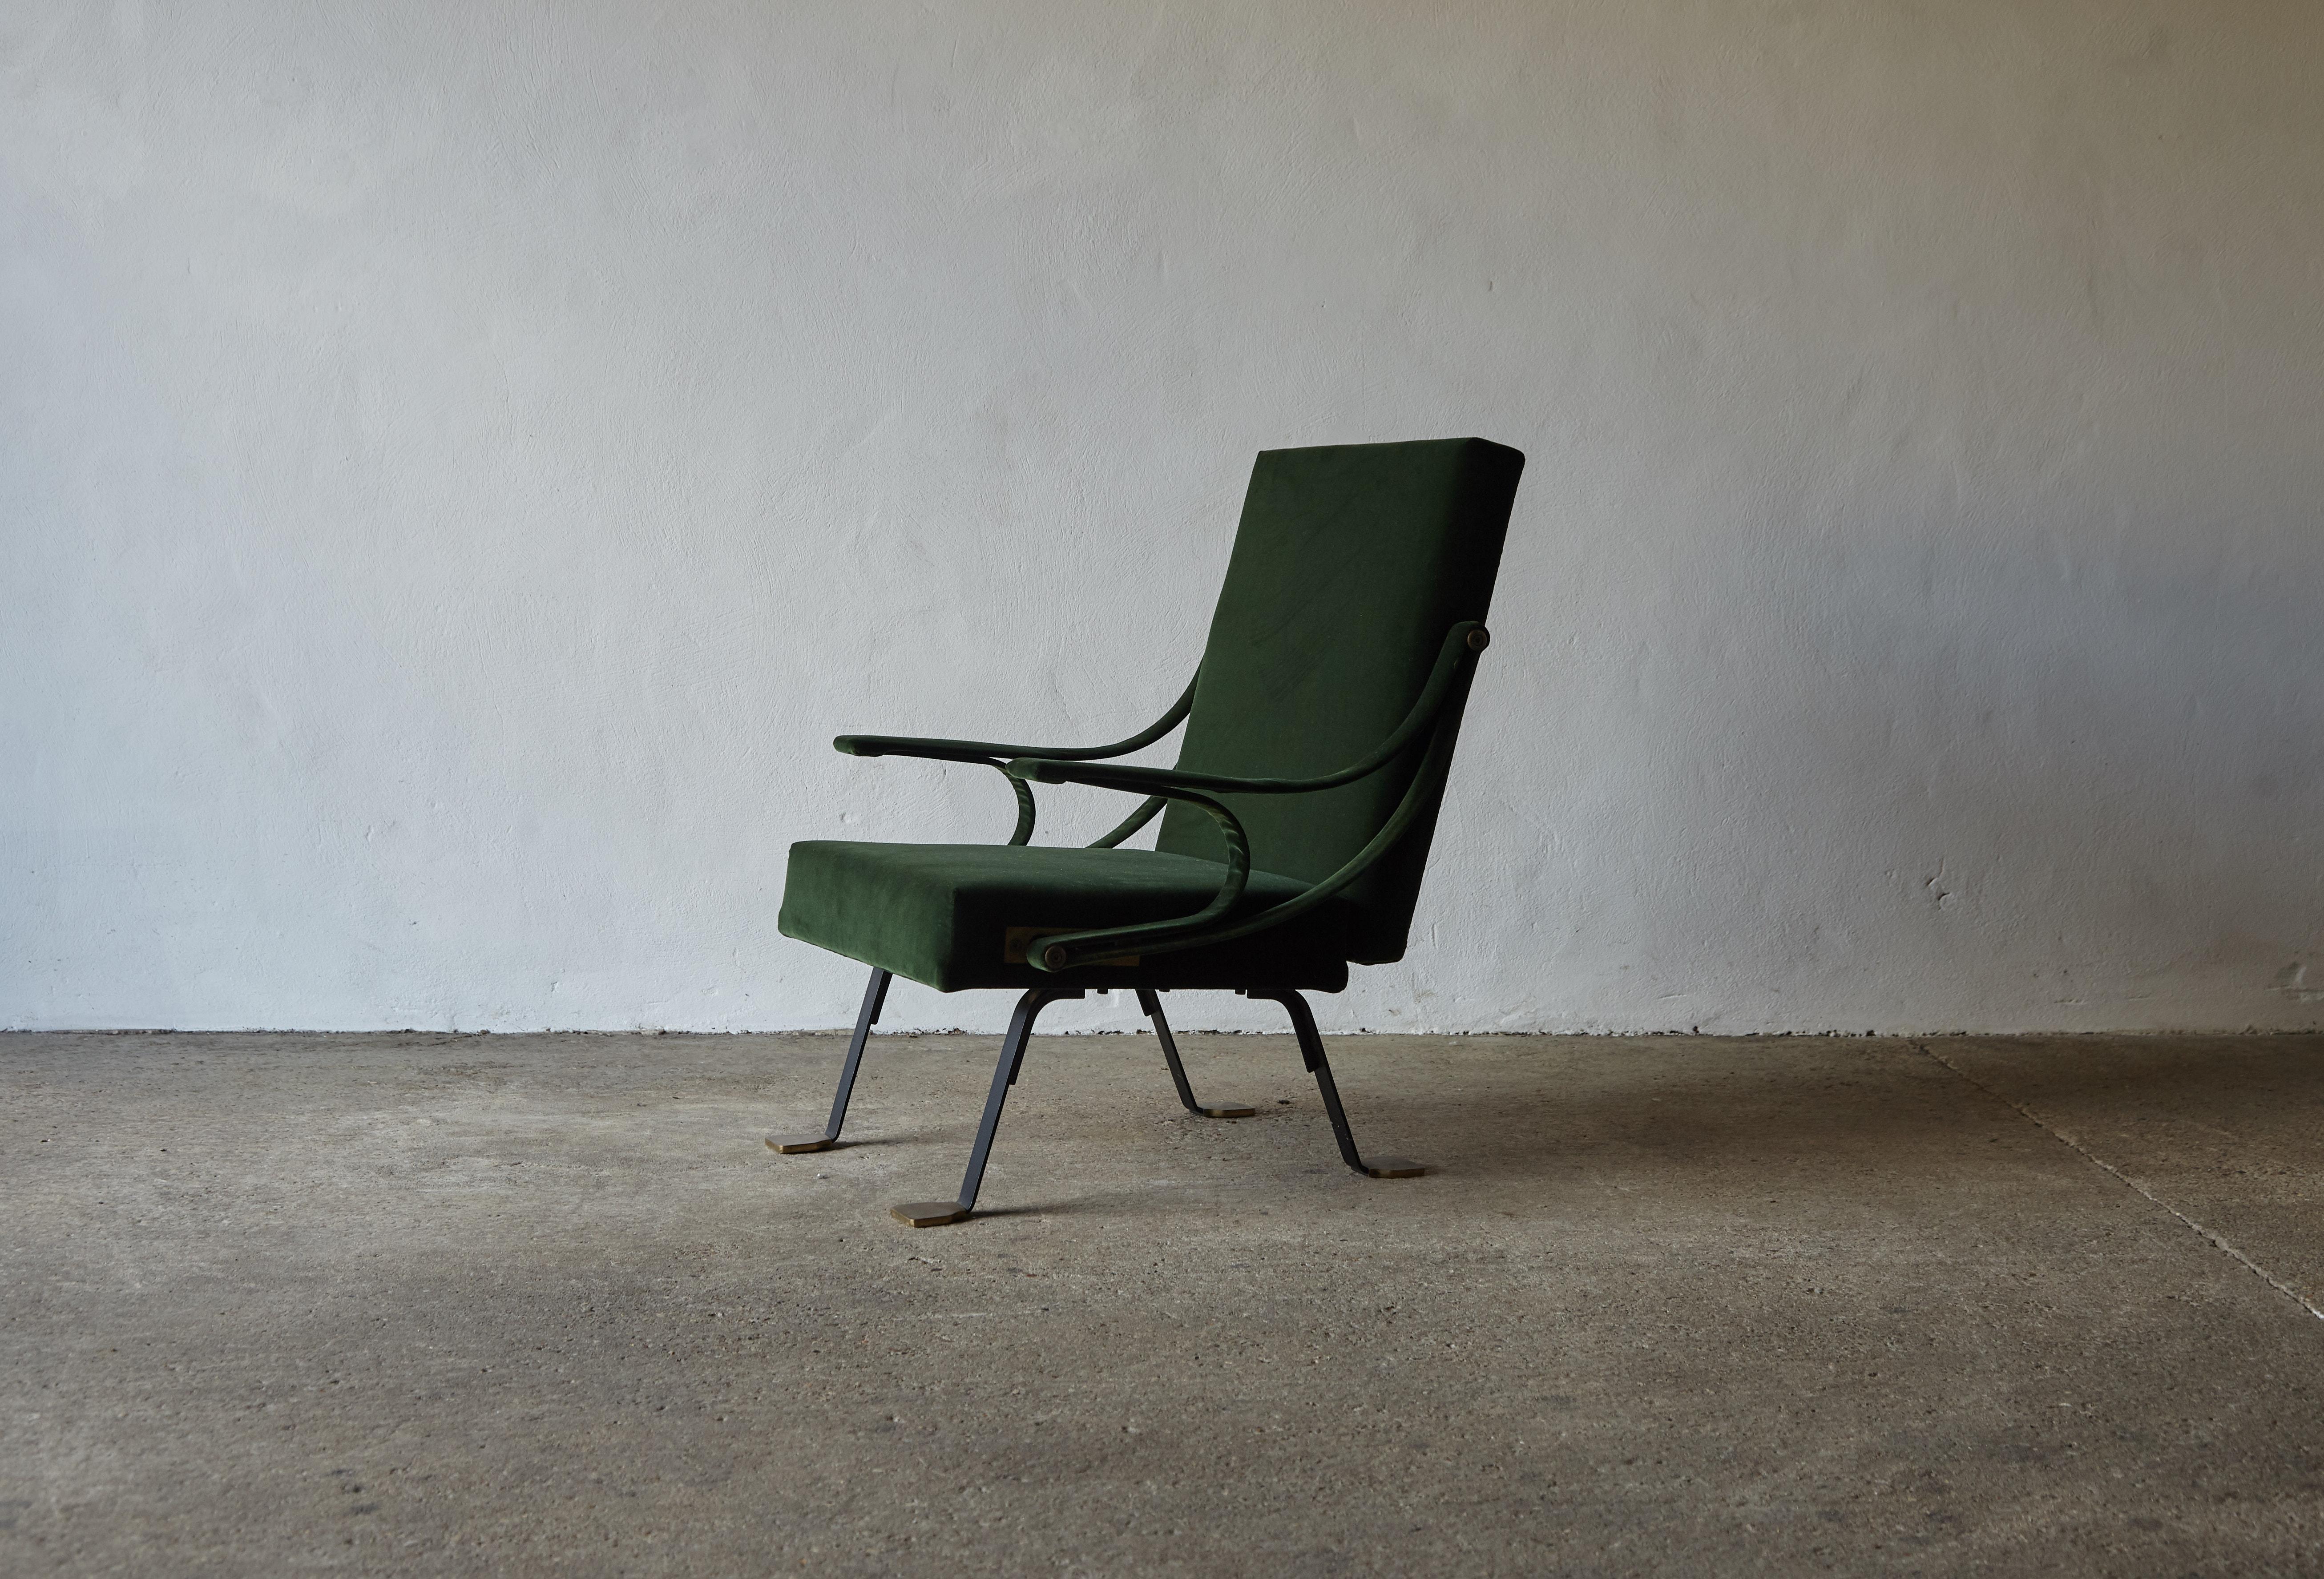 A rare original Ignazio Gardella Reclining Digamma chair, designed in the late 1950s and produced by Gavina, Italy in the 1960s. Newly upholstered in green velvet, metal frame in original condition with patinated brass feet. Fast shipping worldwide.
